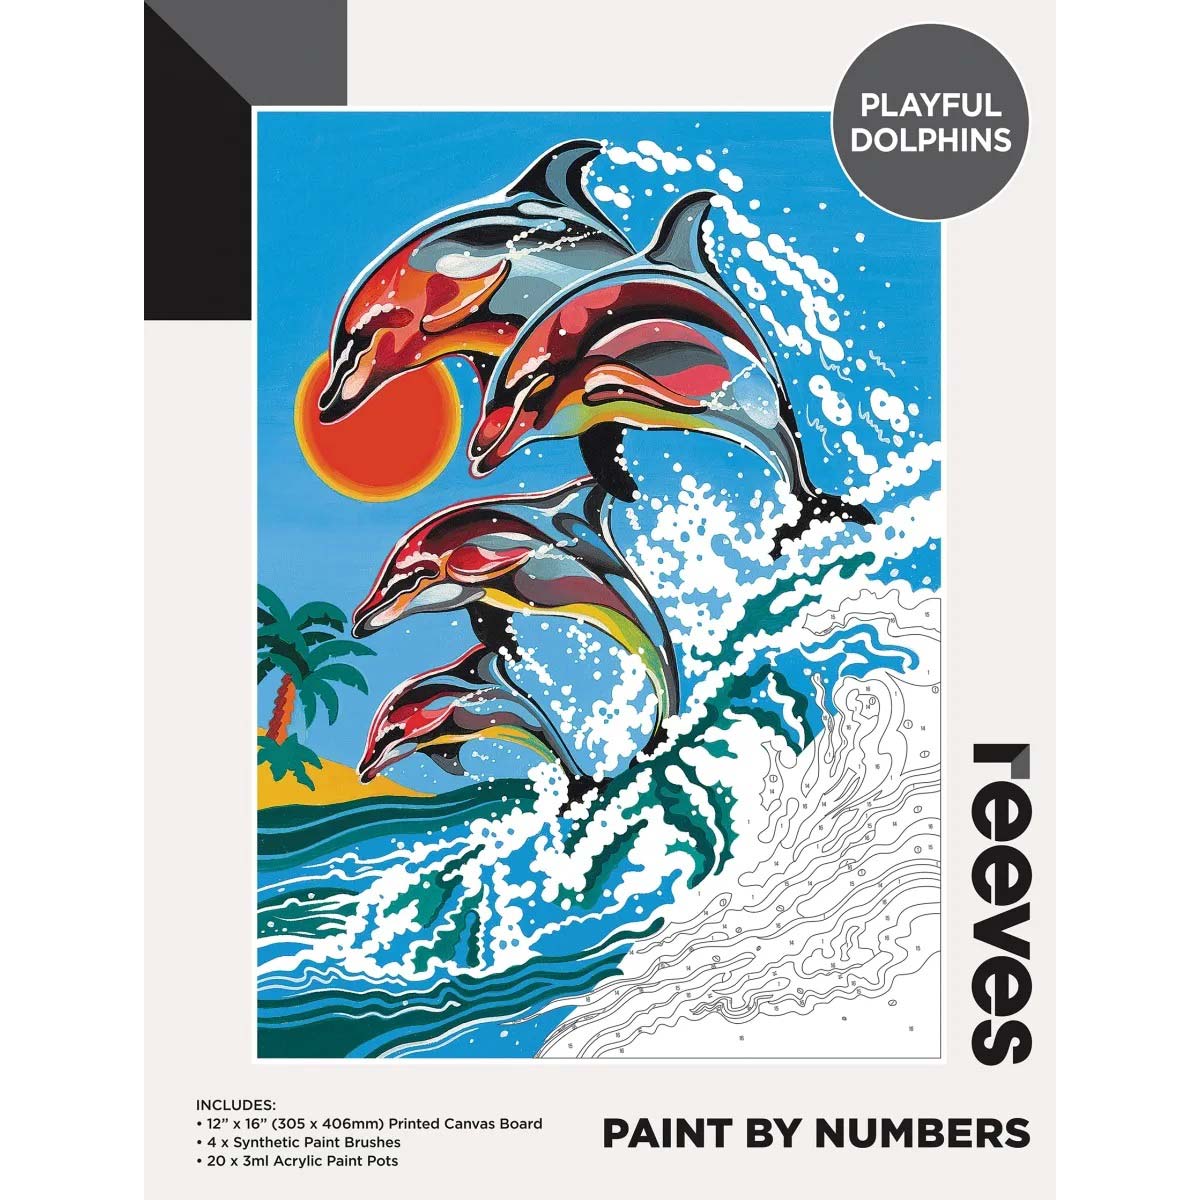 Reeves Paint by Numbers Large 12x16 inch - Playful Dolphins